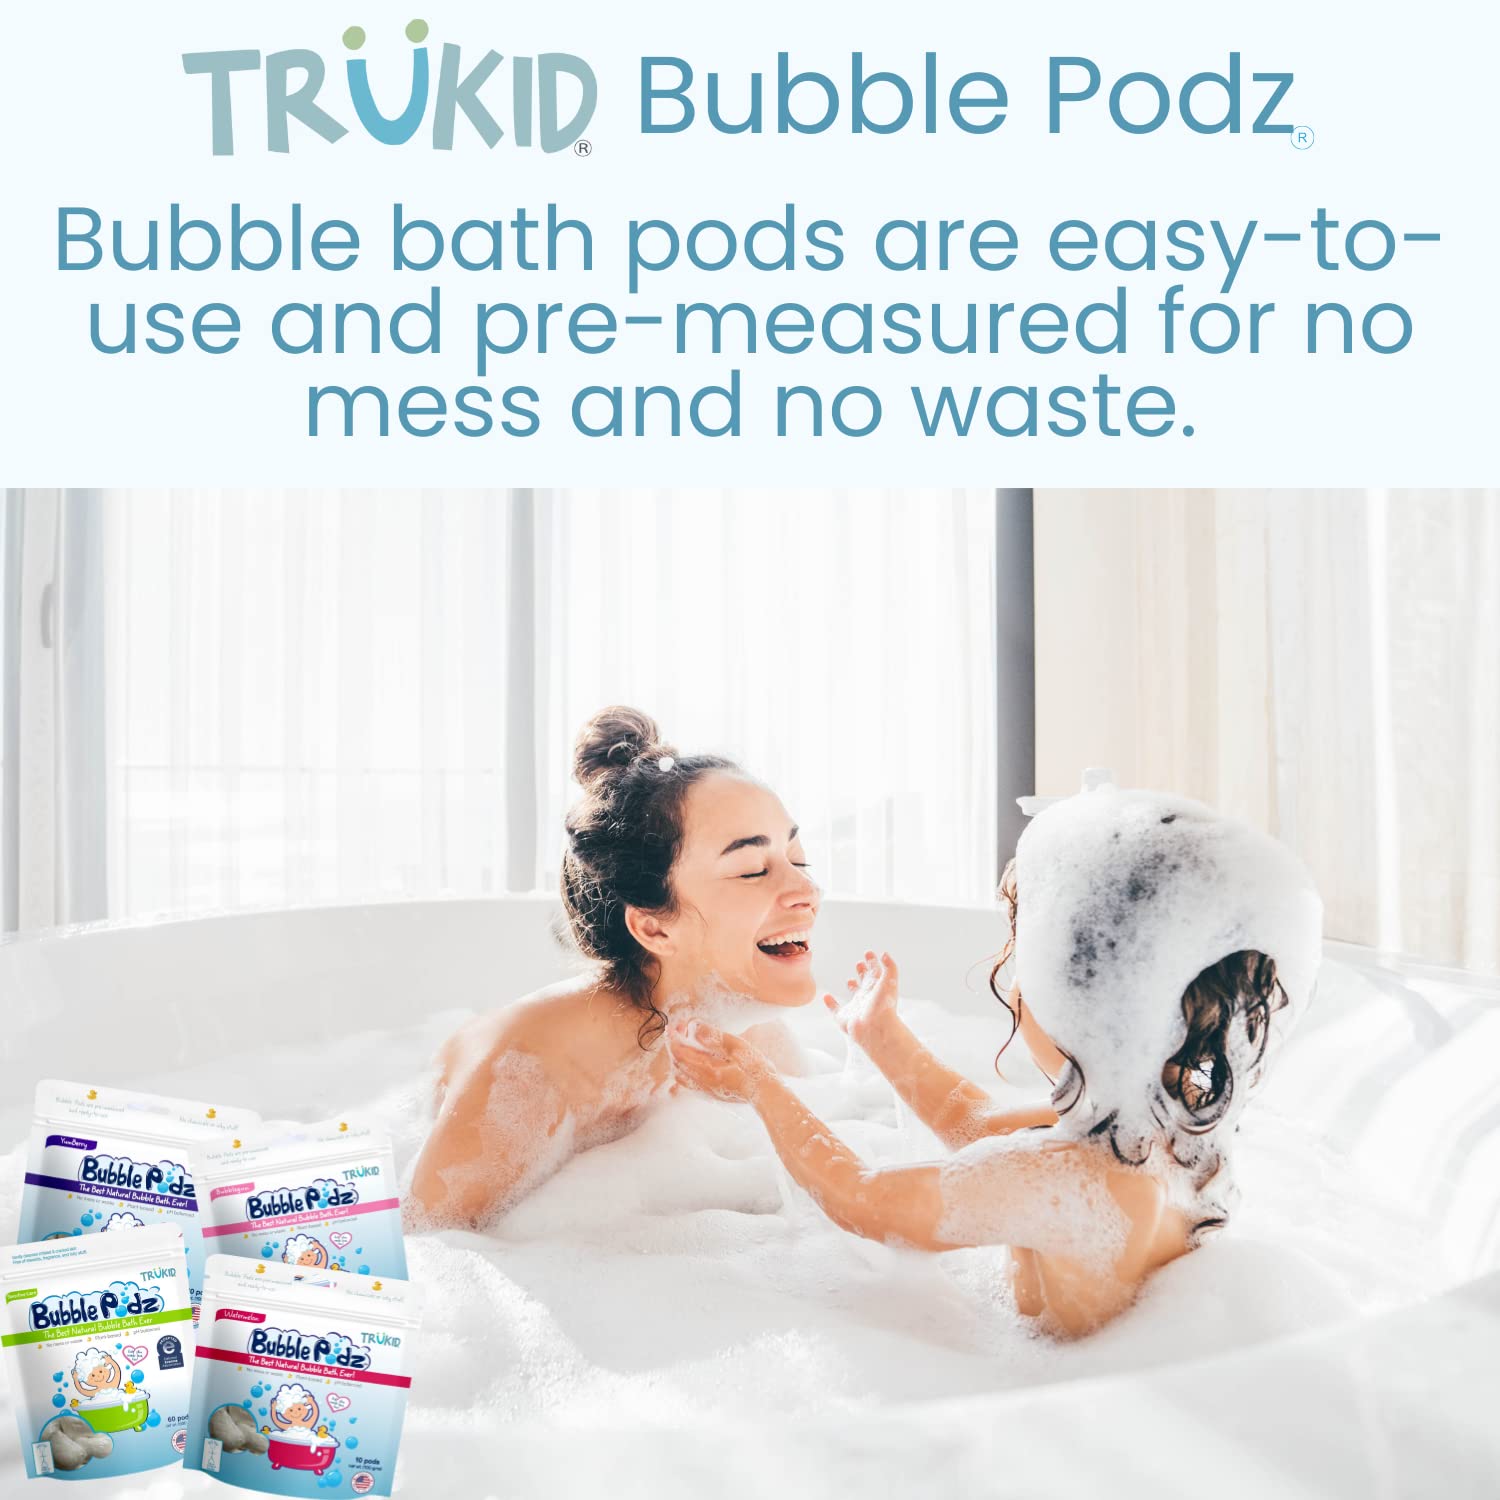 TruKid Bubble Podz Bubble Bath for Baby & Kids, Gentle Refreshing Bath Bomb for Sensitive Skin, pH Balance 7 for Eye Sensitivity, Natural Moisturizers and Ingredients, Yumberry (60 Podz)